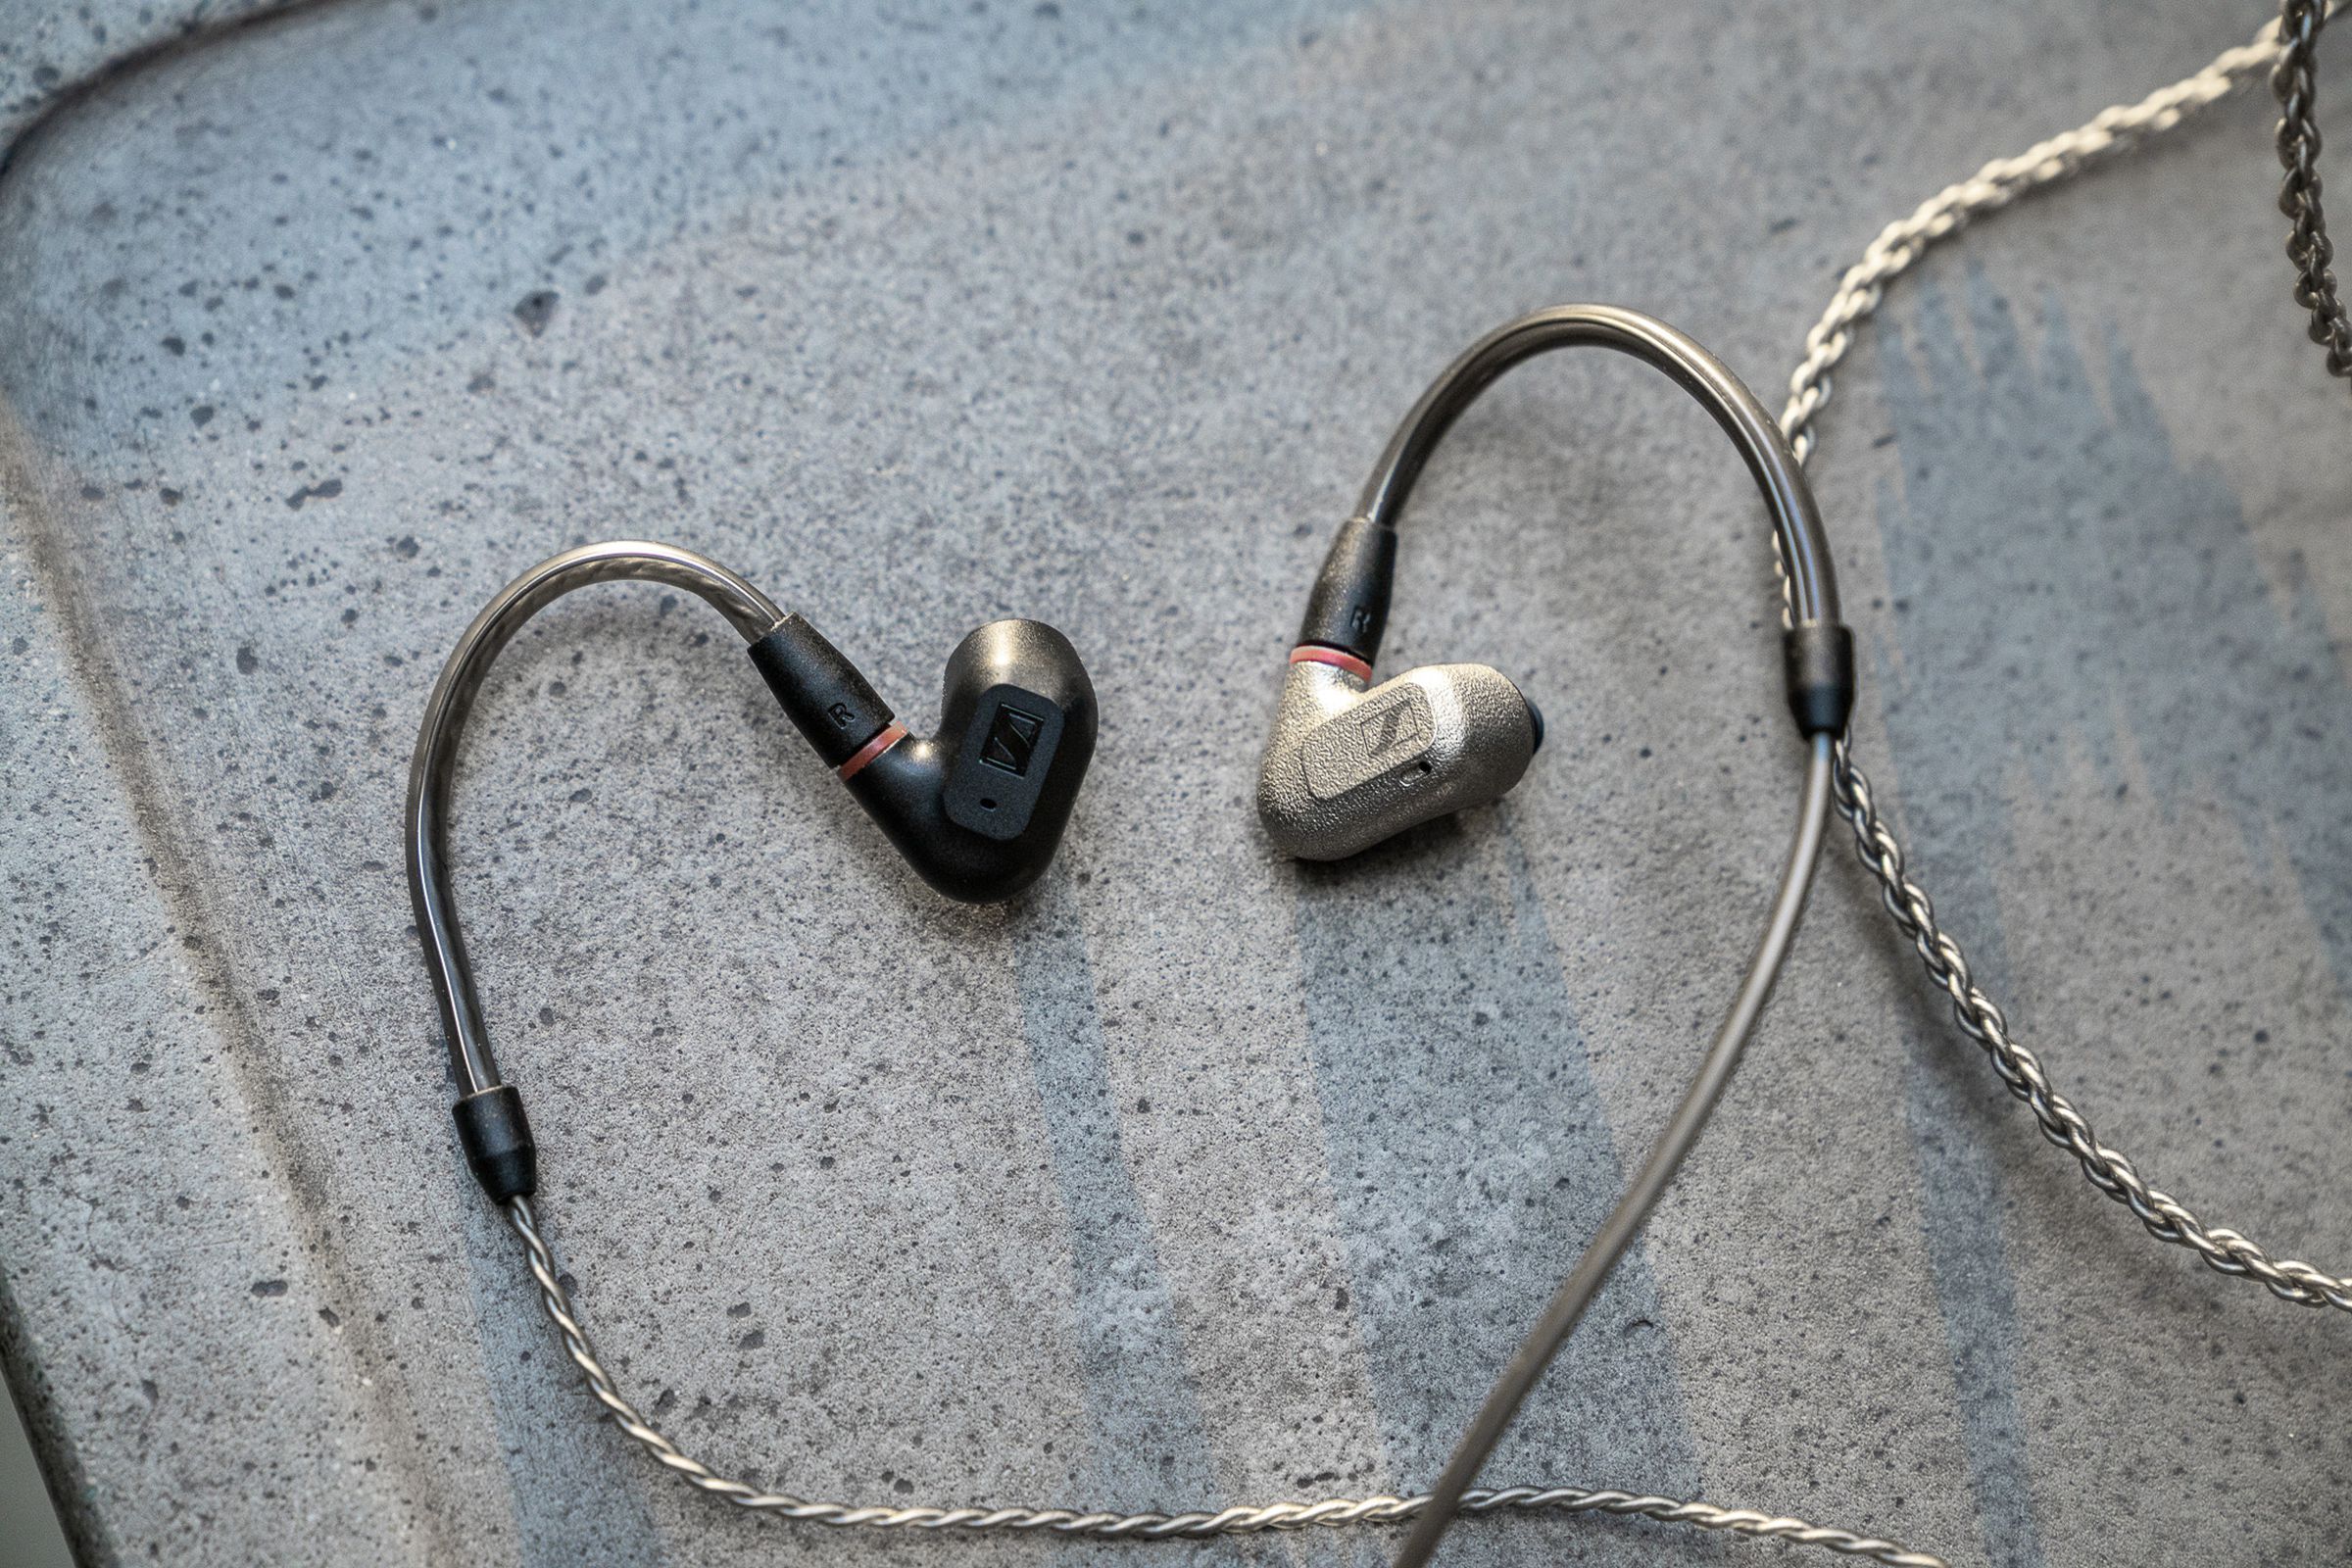 Sennheiser IE 200 earbuds review: reconnecting with music — literally